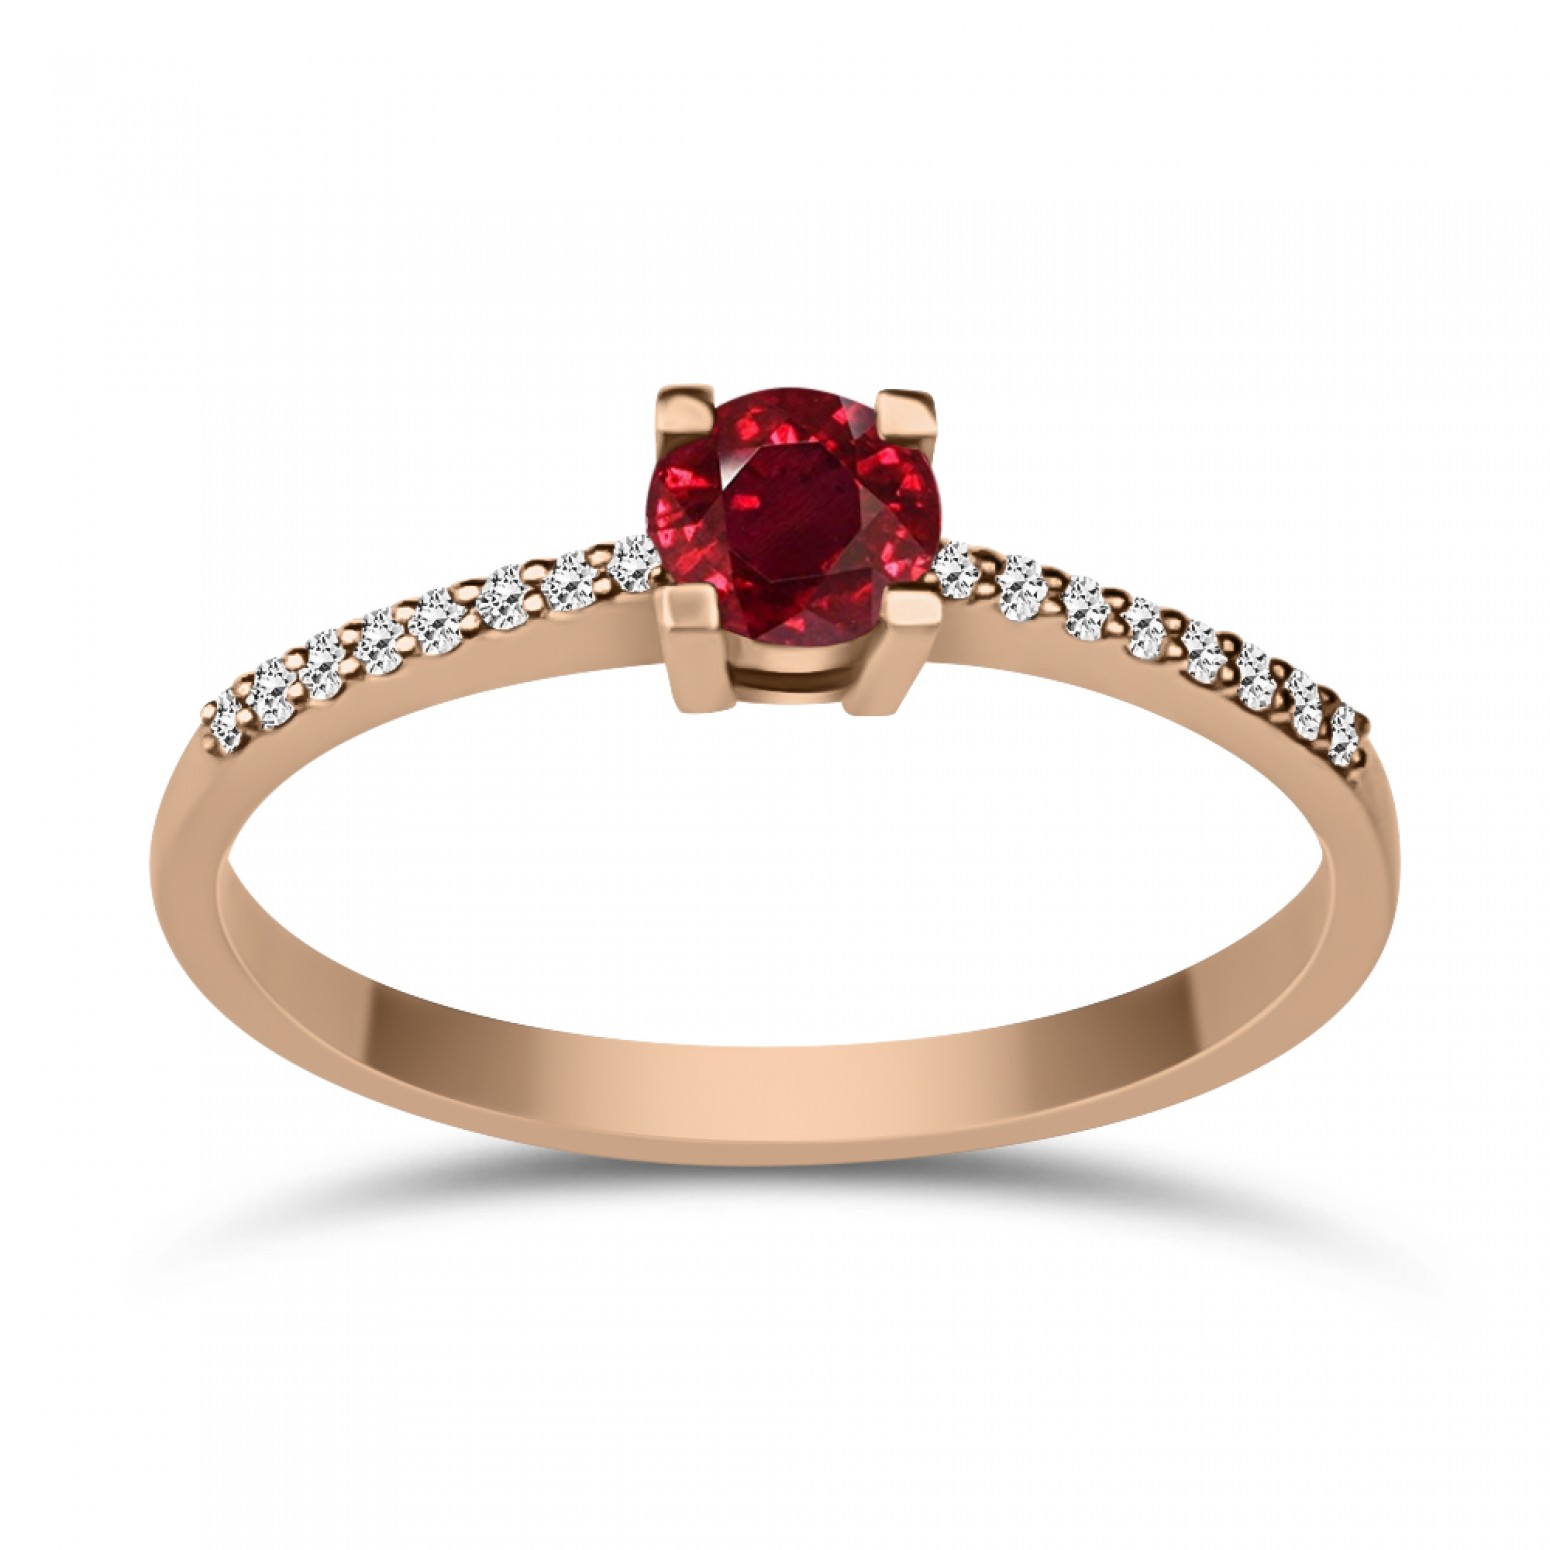 Solitaire ring 18K pink gold with ruby 0.26ct and diamonds VS1, H da3859 ENGAGEMENT RINGS Κοσμηματα - chrilia.gr